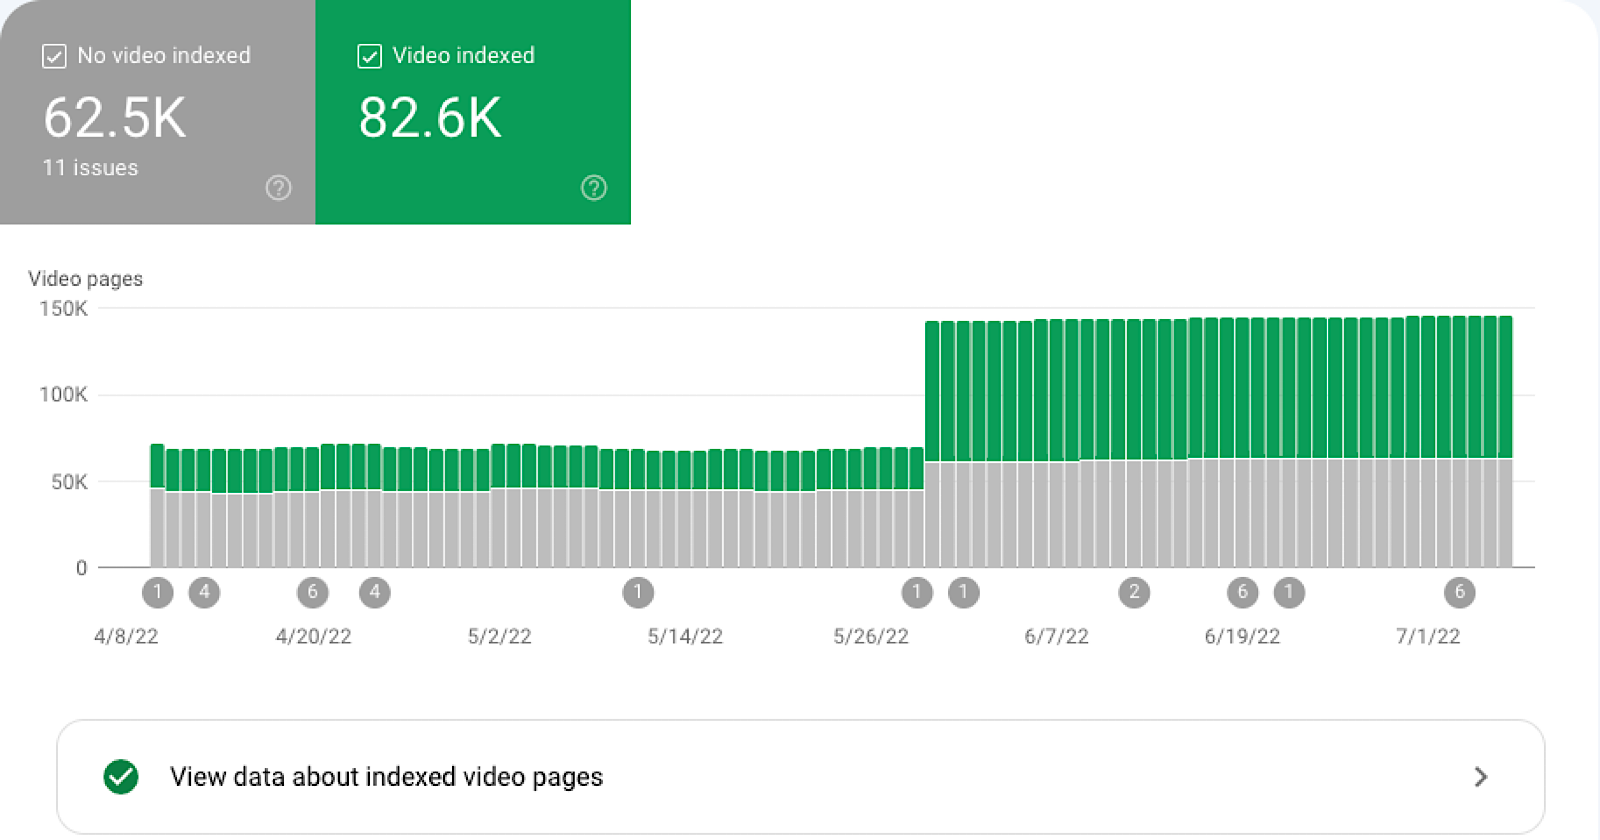 Google Search Console Video Indexing Report Now Available via @sejournal, @MattGSouthern